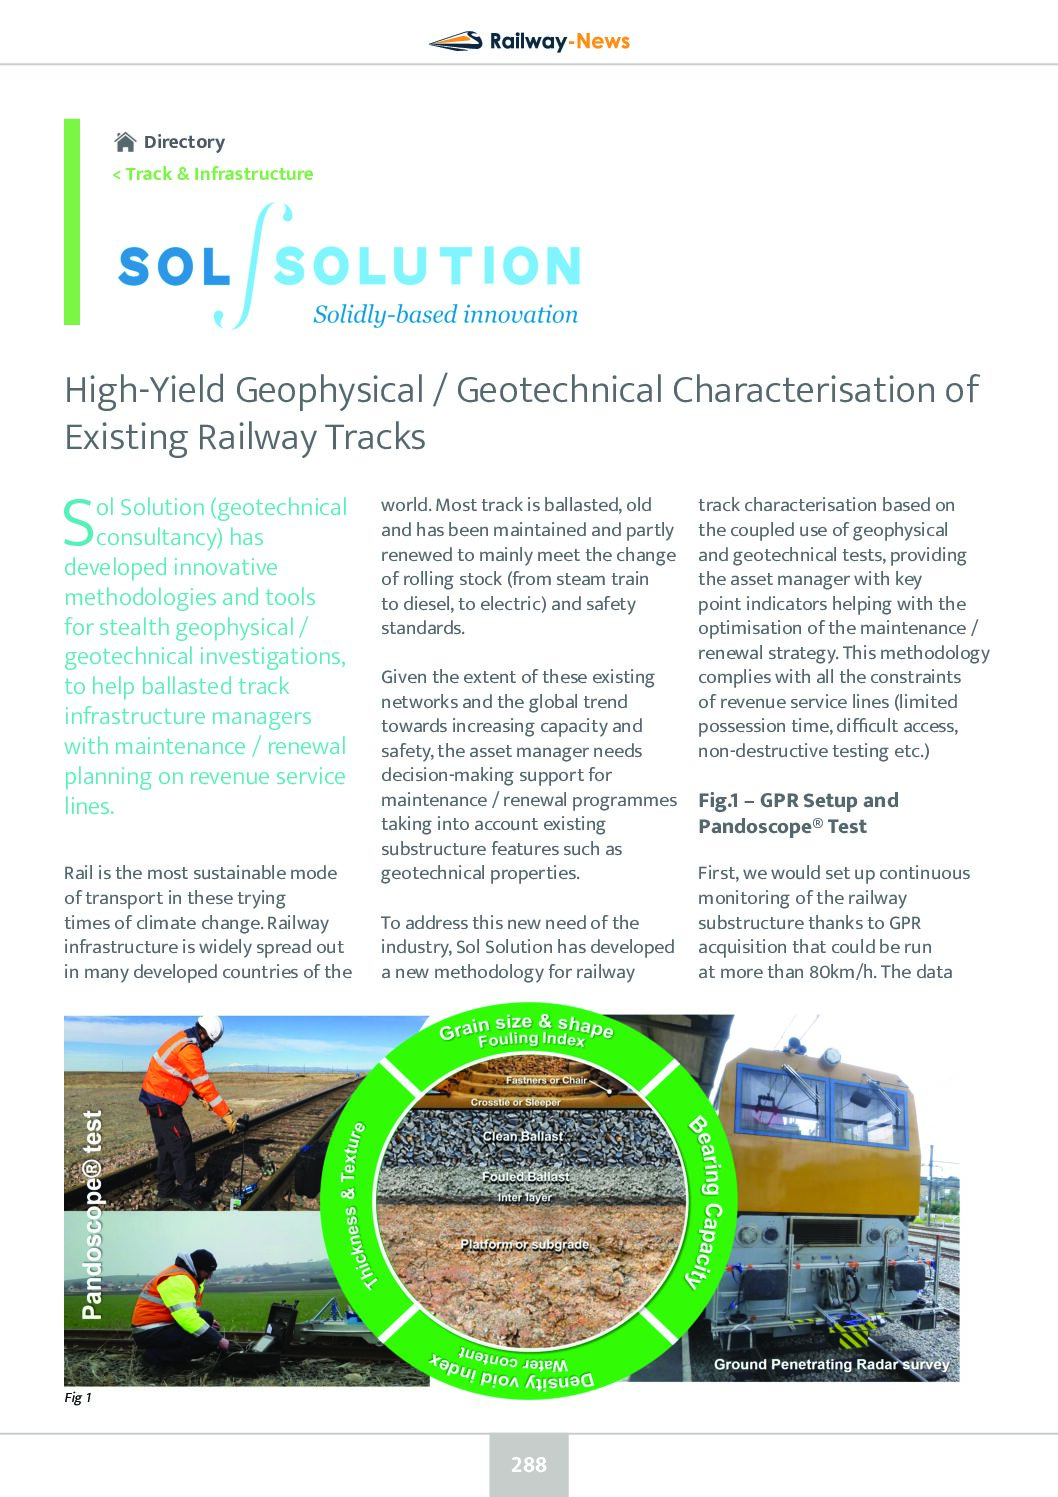 High-Yield Geophysical / Geotechnical Characterisation of Existing Railway Tracks